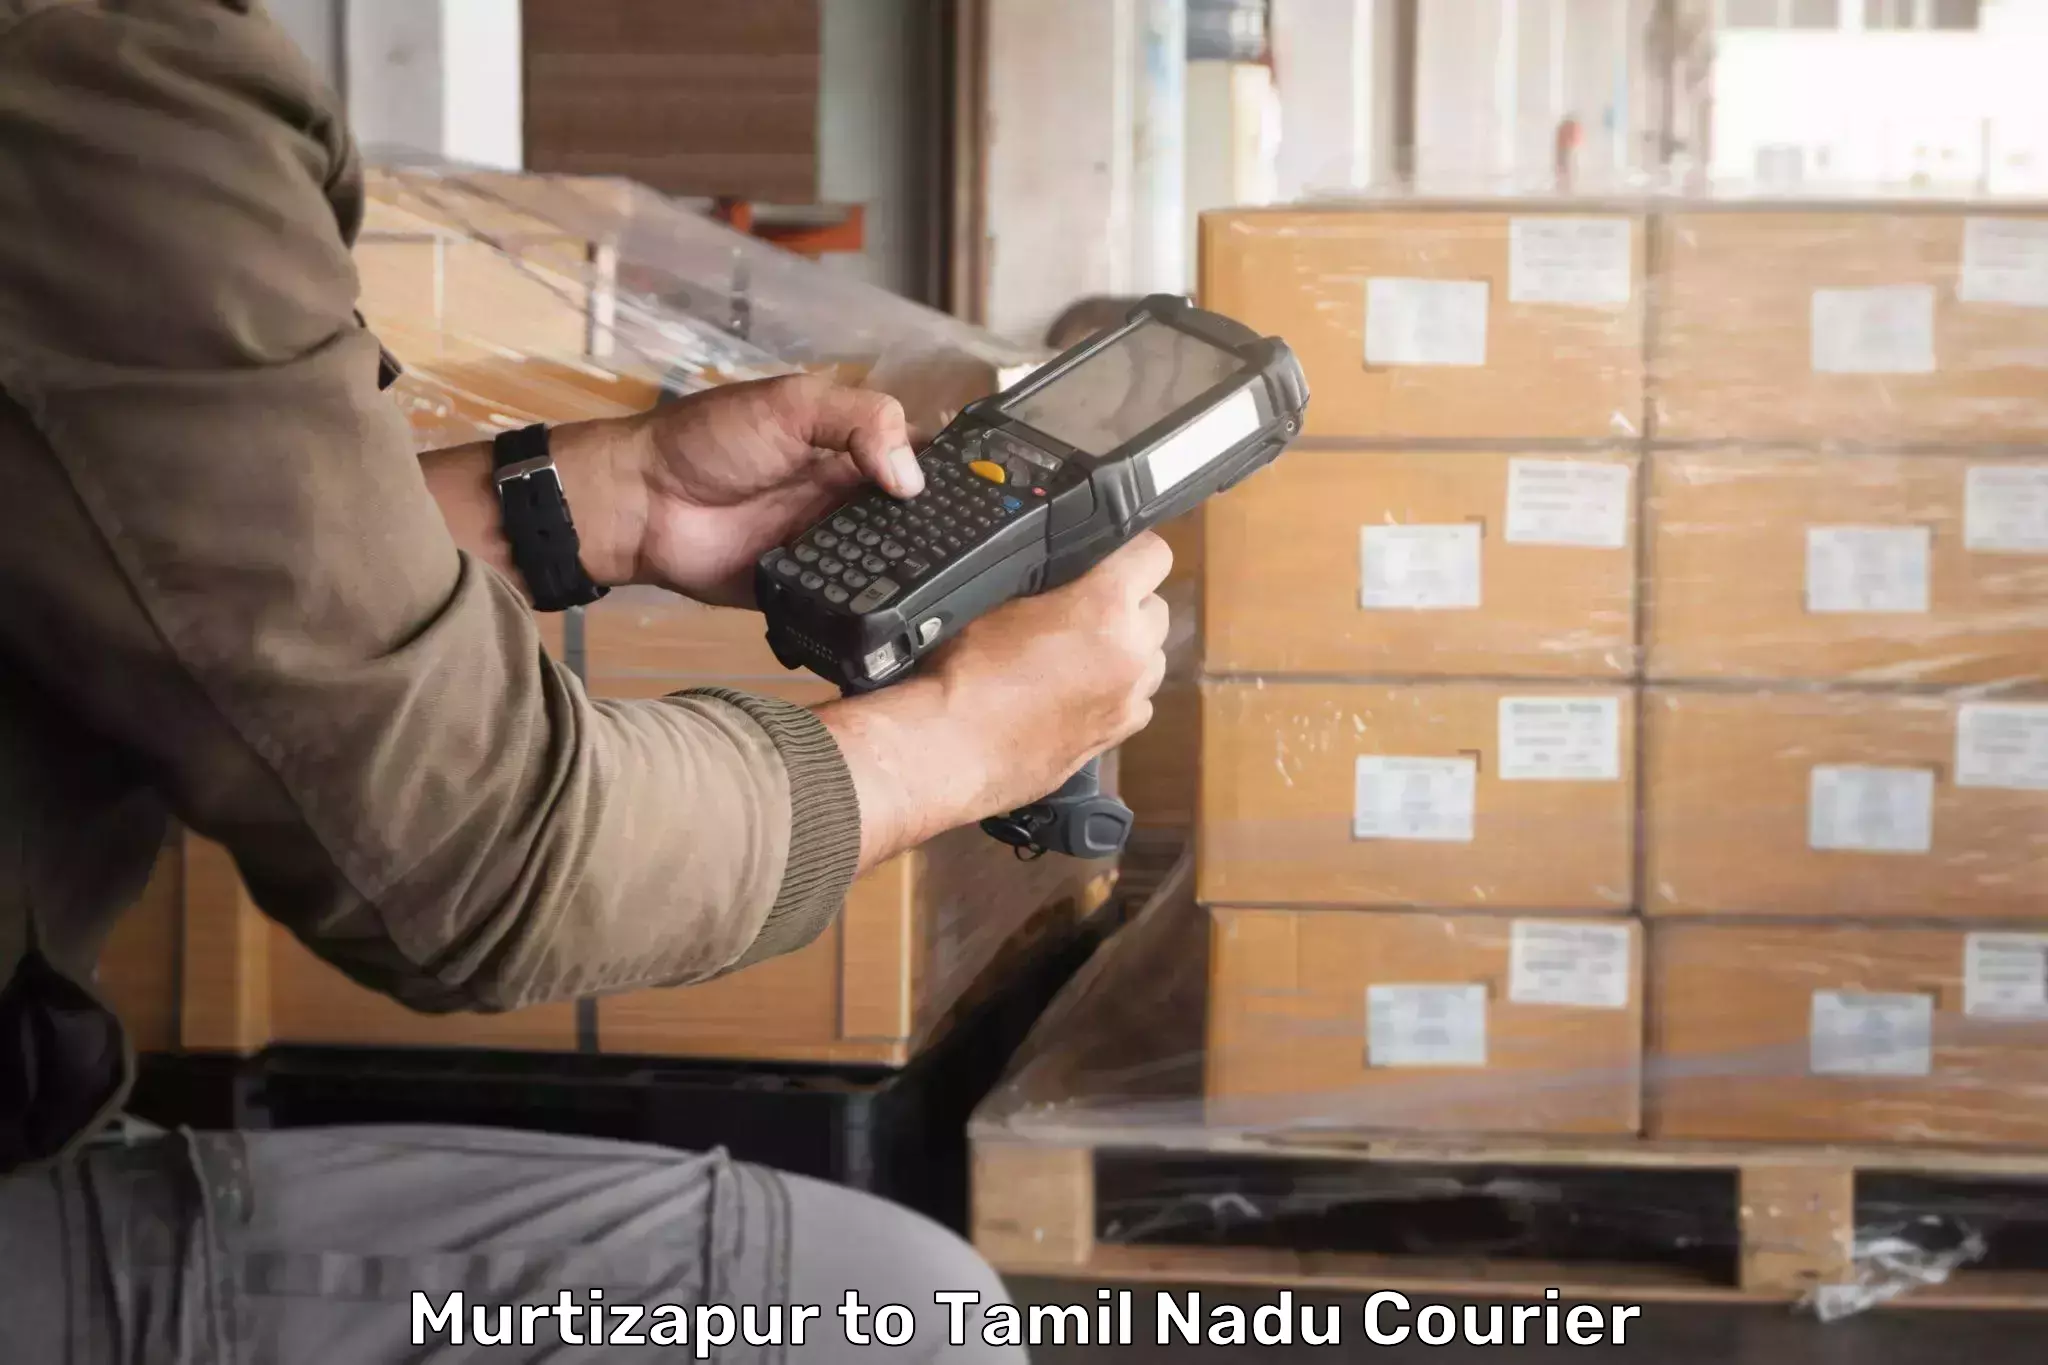 State-of-the-art courier technology Murtizapur to Tuticorin Port